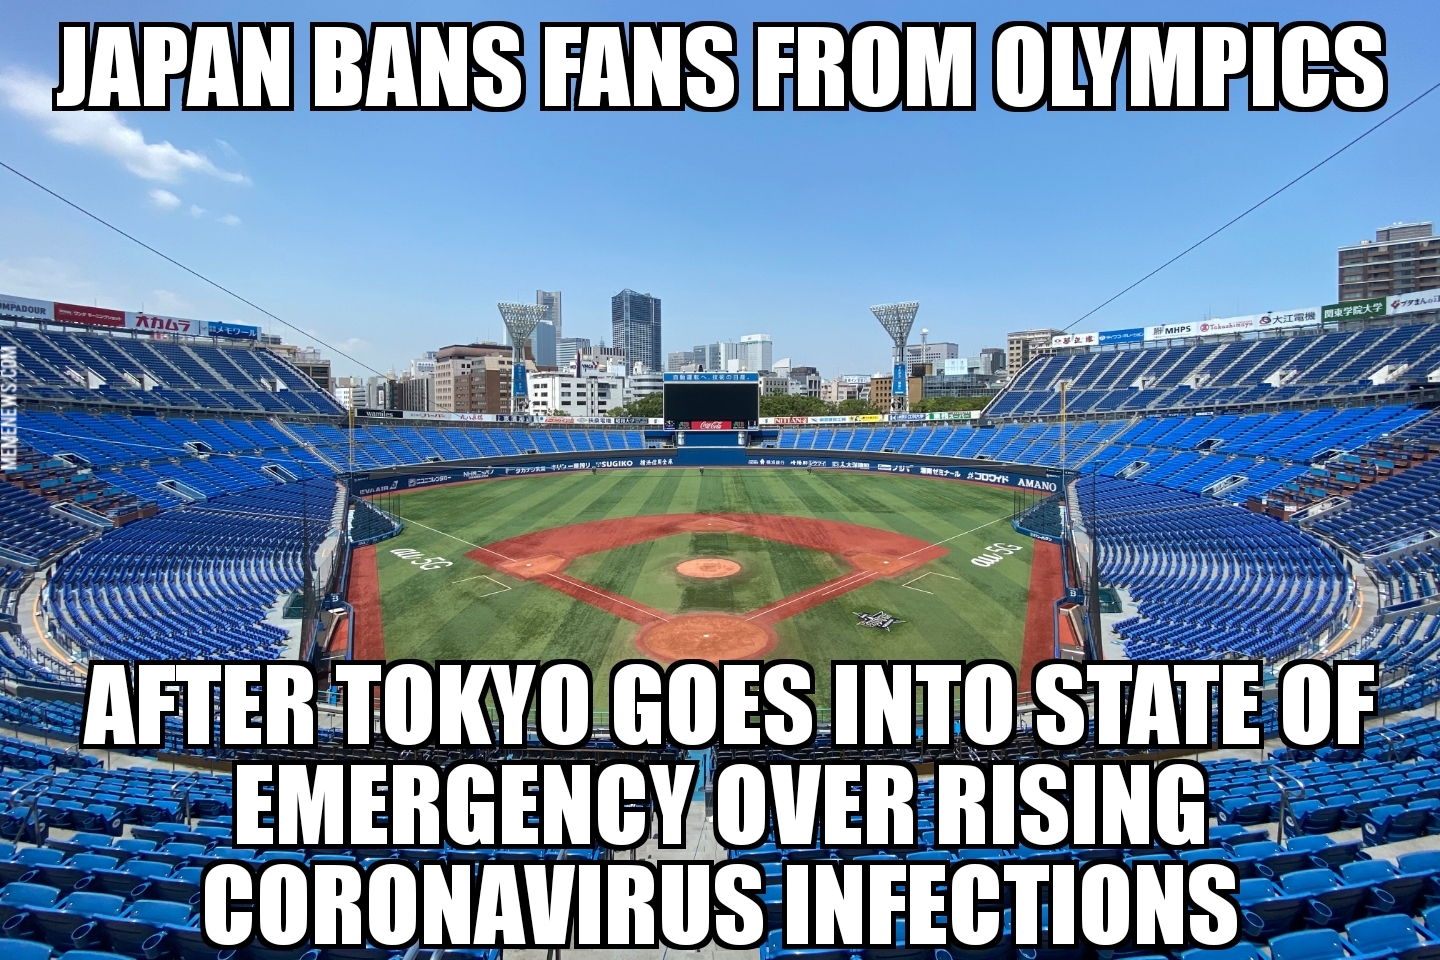 Japan bans fans from Olympics